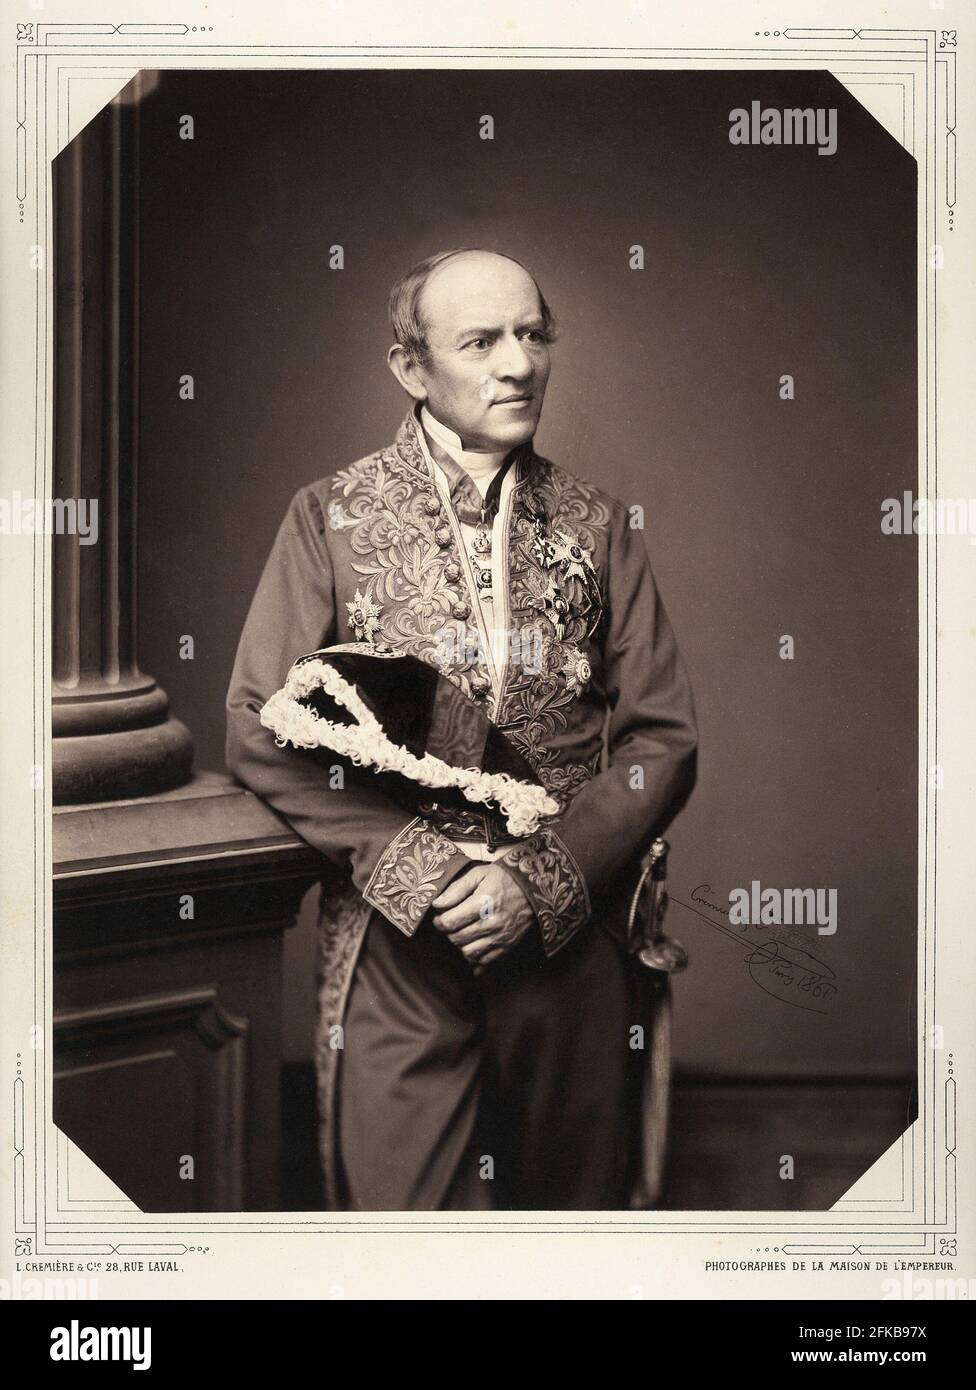 Duke Charles Tascher de la Pagerie, First Chamberlain of the Emperor. Photograph (1861) by Léon Crémière, photographer to the Emperor.  Forms part of a portfolio of 40 portraits documenting prominent figures of the Second Empire.  Paris, Fondation Napoléon Stock Photo